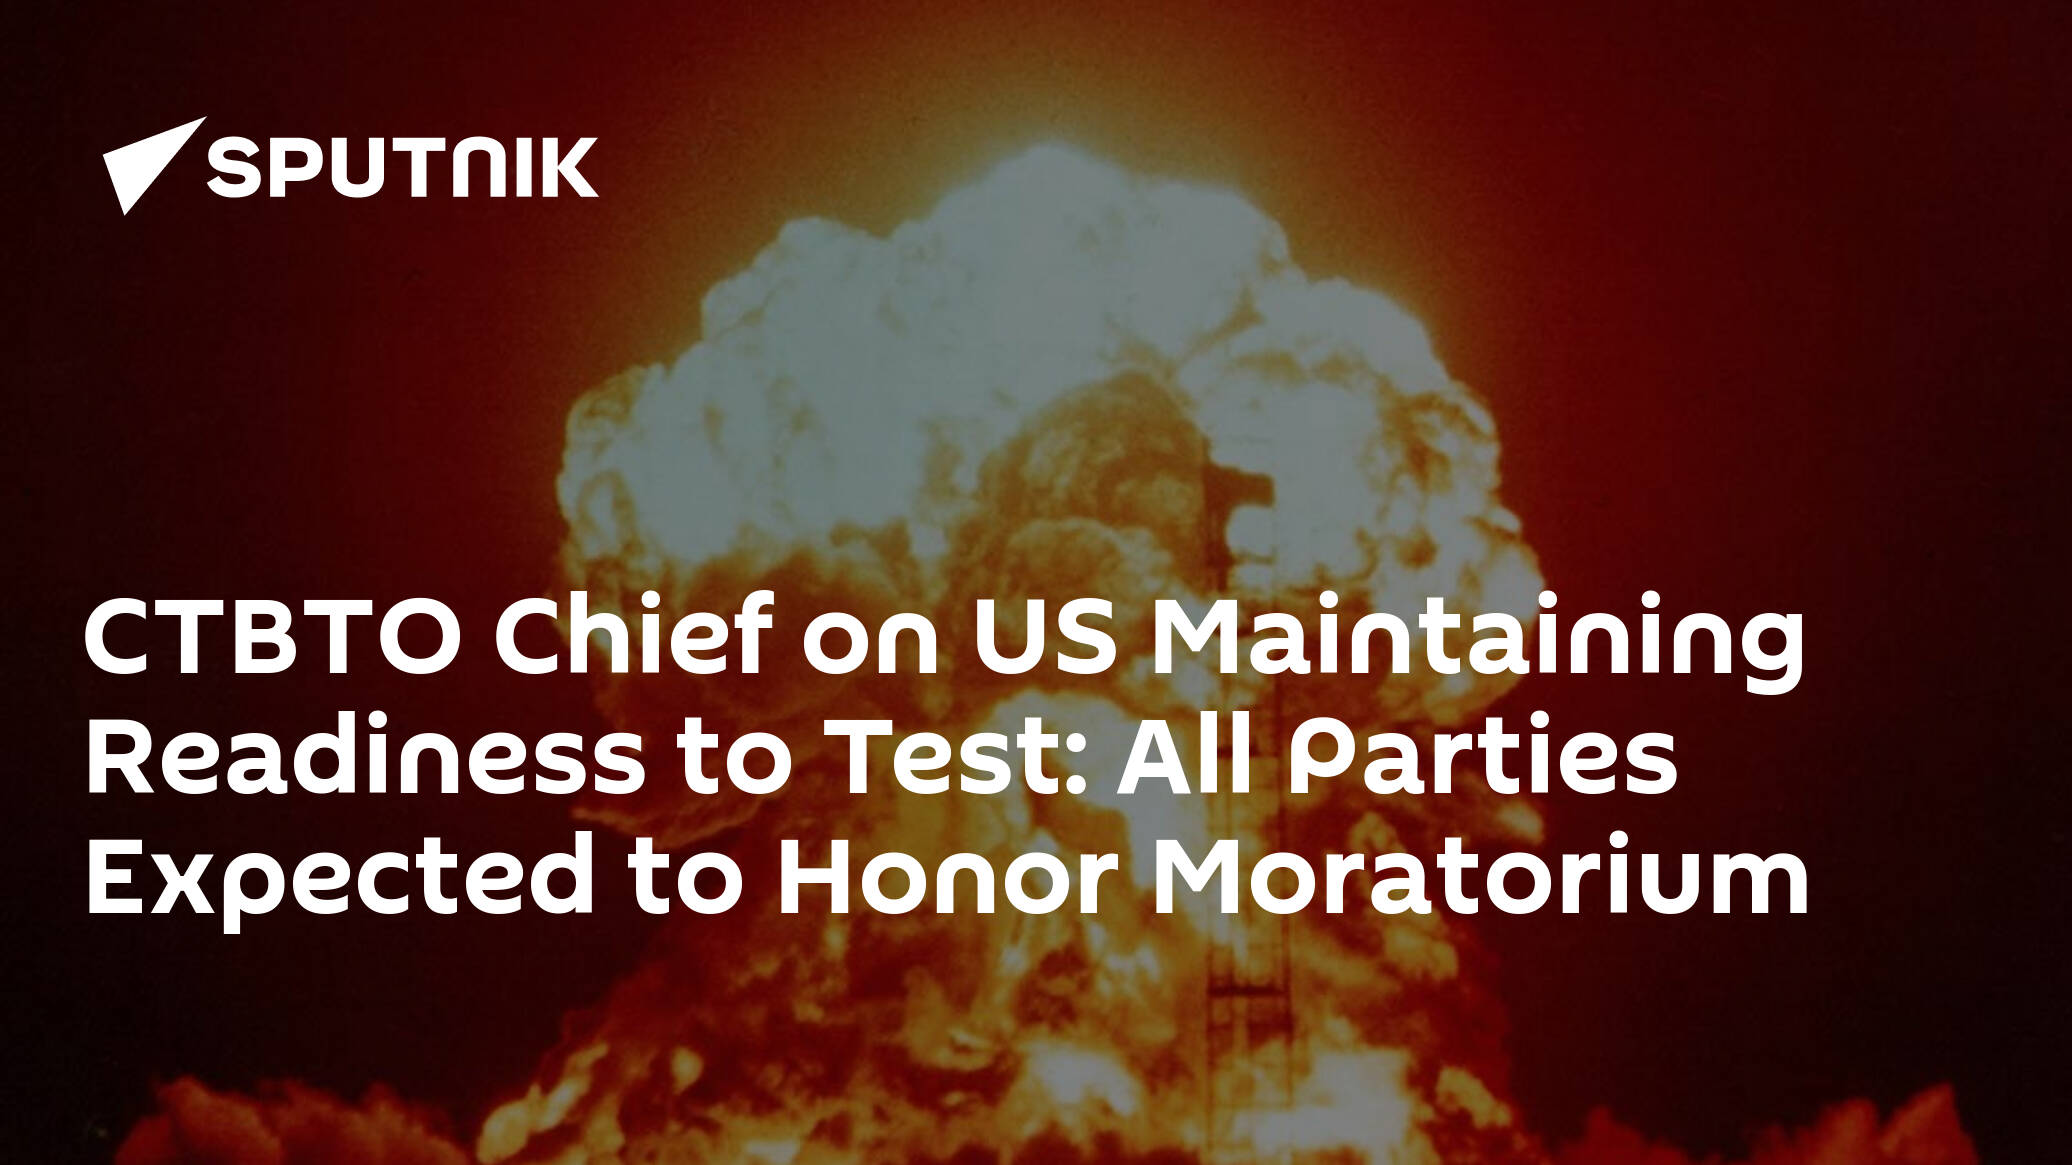 CTBTO Chief on US Maintaining Readiness to Test: All Parties Expected to Honor Moratorium